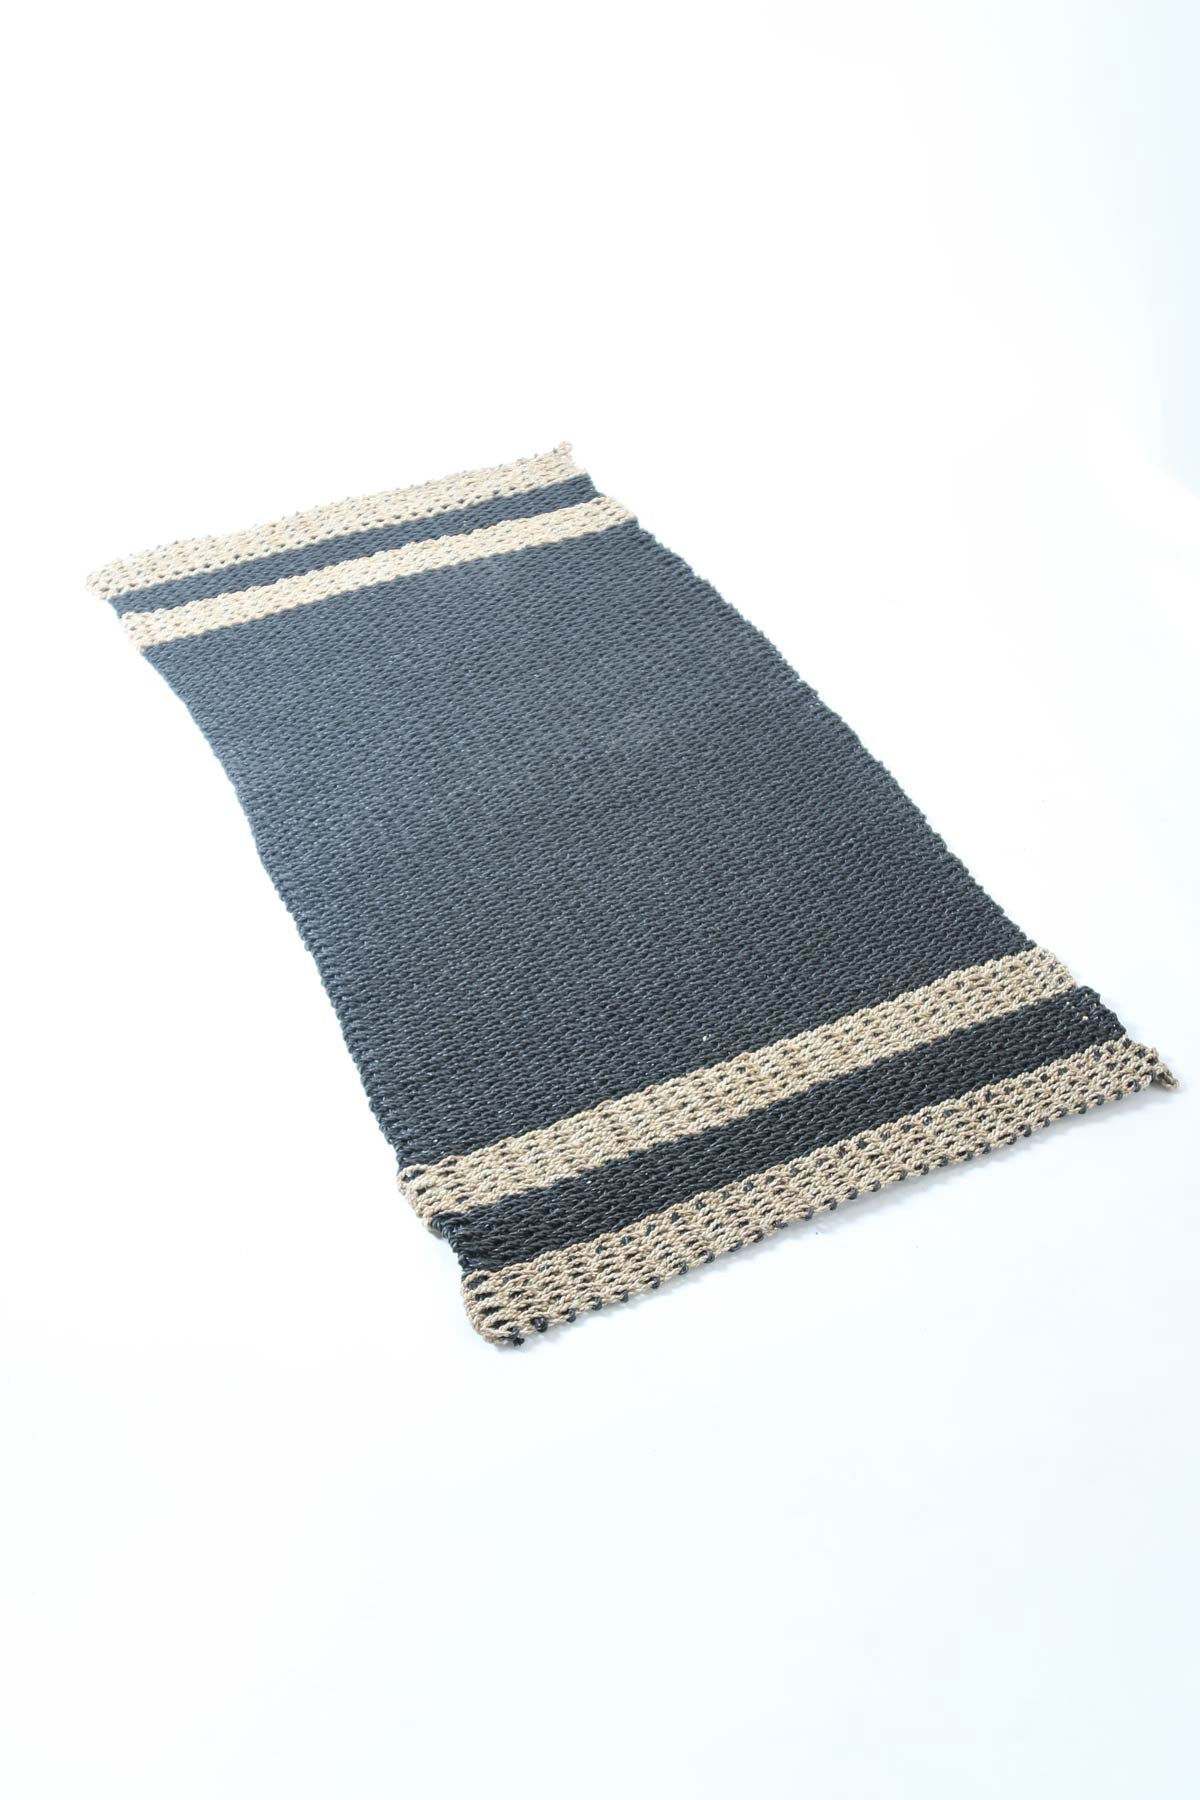 Hand Woven Recycled Plastic and Seagrass Striped Floor Mat